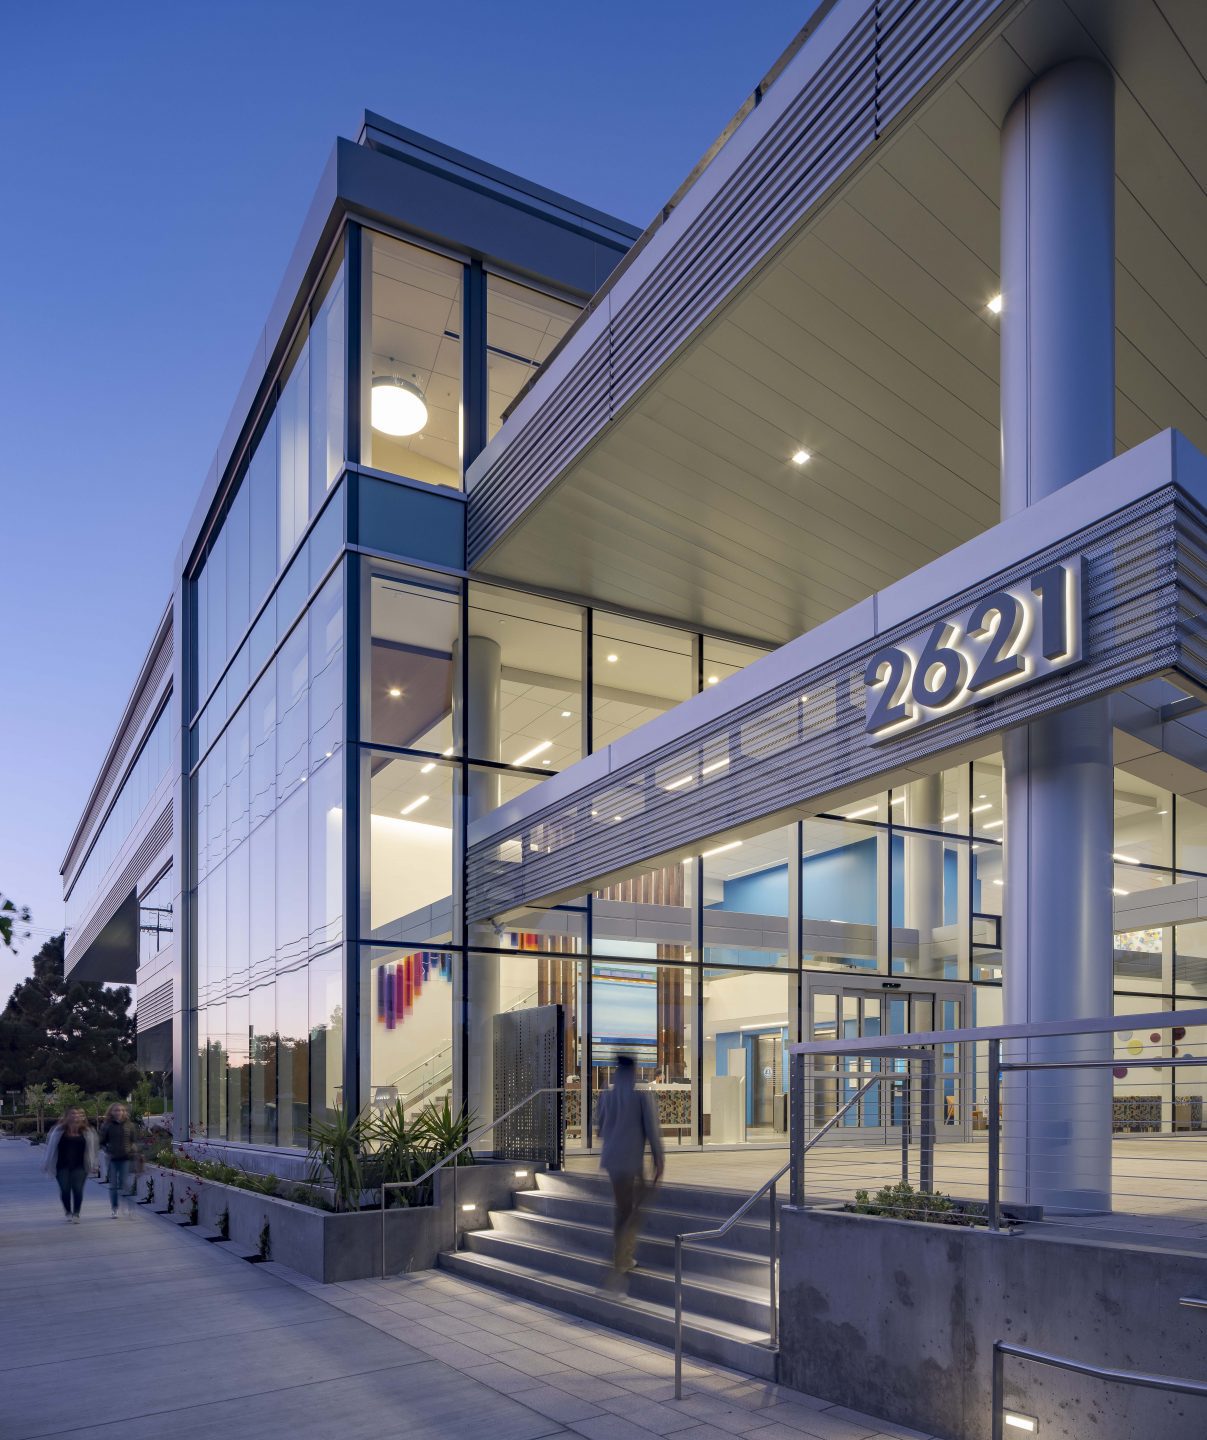 An exterior view of the Kaiser Permanente Berkeley Medical Office Building's double-height lobby at dusk.